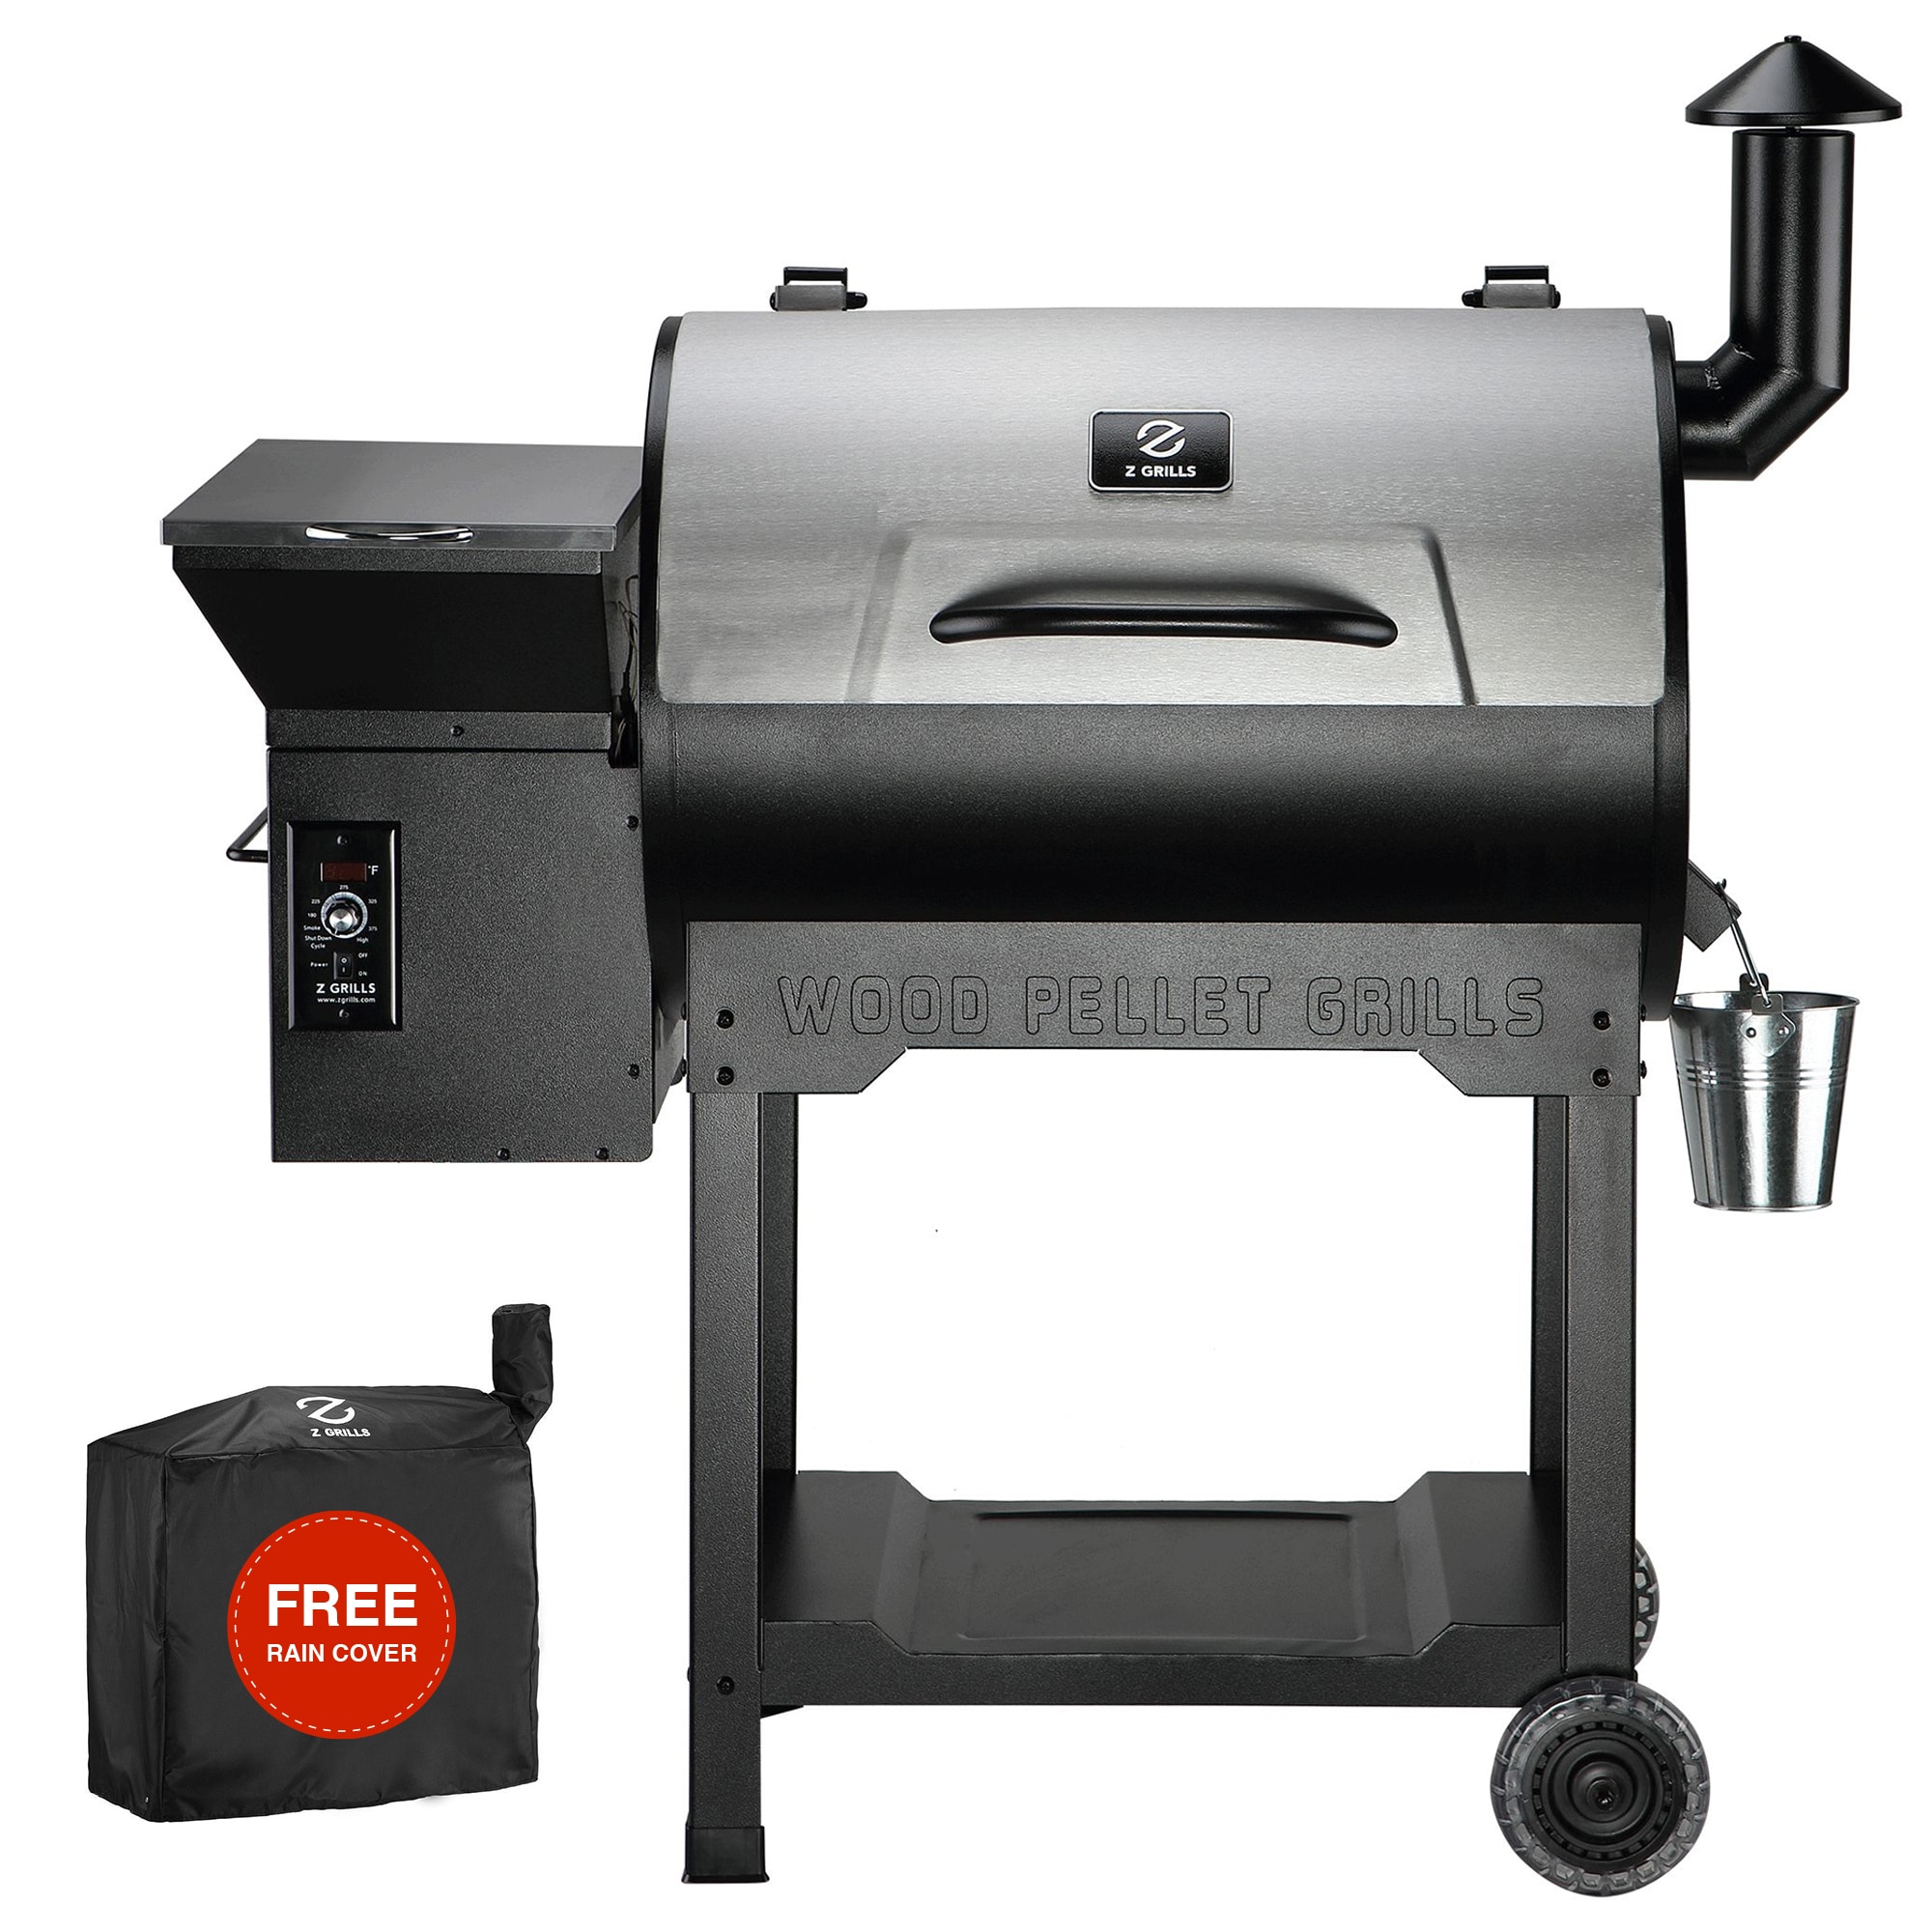 Z GRILLS Wood Pellet Grill, 8 in 1 BBQ Smoker with Foldable Front Shelf,  Ash Cleanout System, Rain Cover, 1056 sq.in Cooking Area for Outdoor BBQ